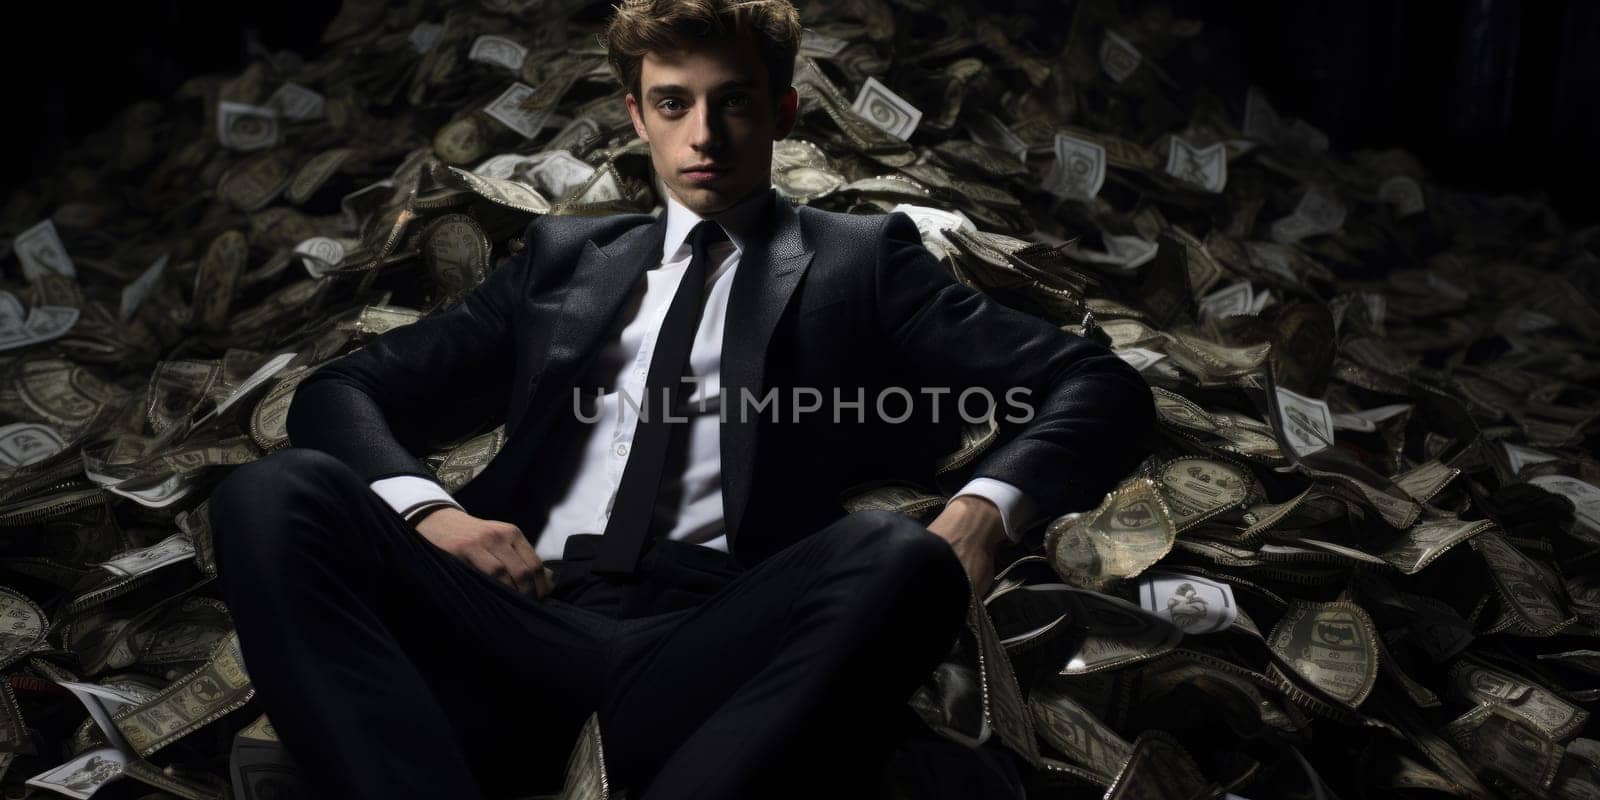 Billionaire on Big Pile of Banknotes Rich Comeliness by biancoblue